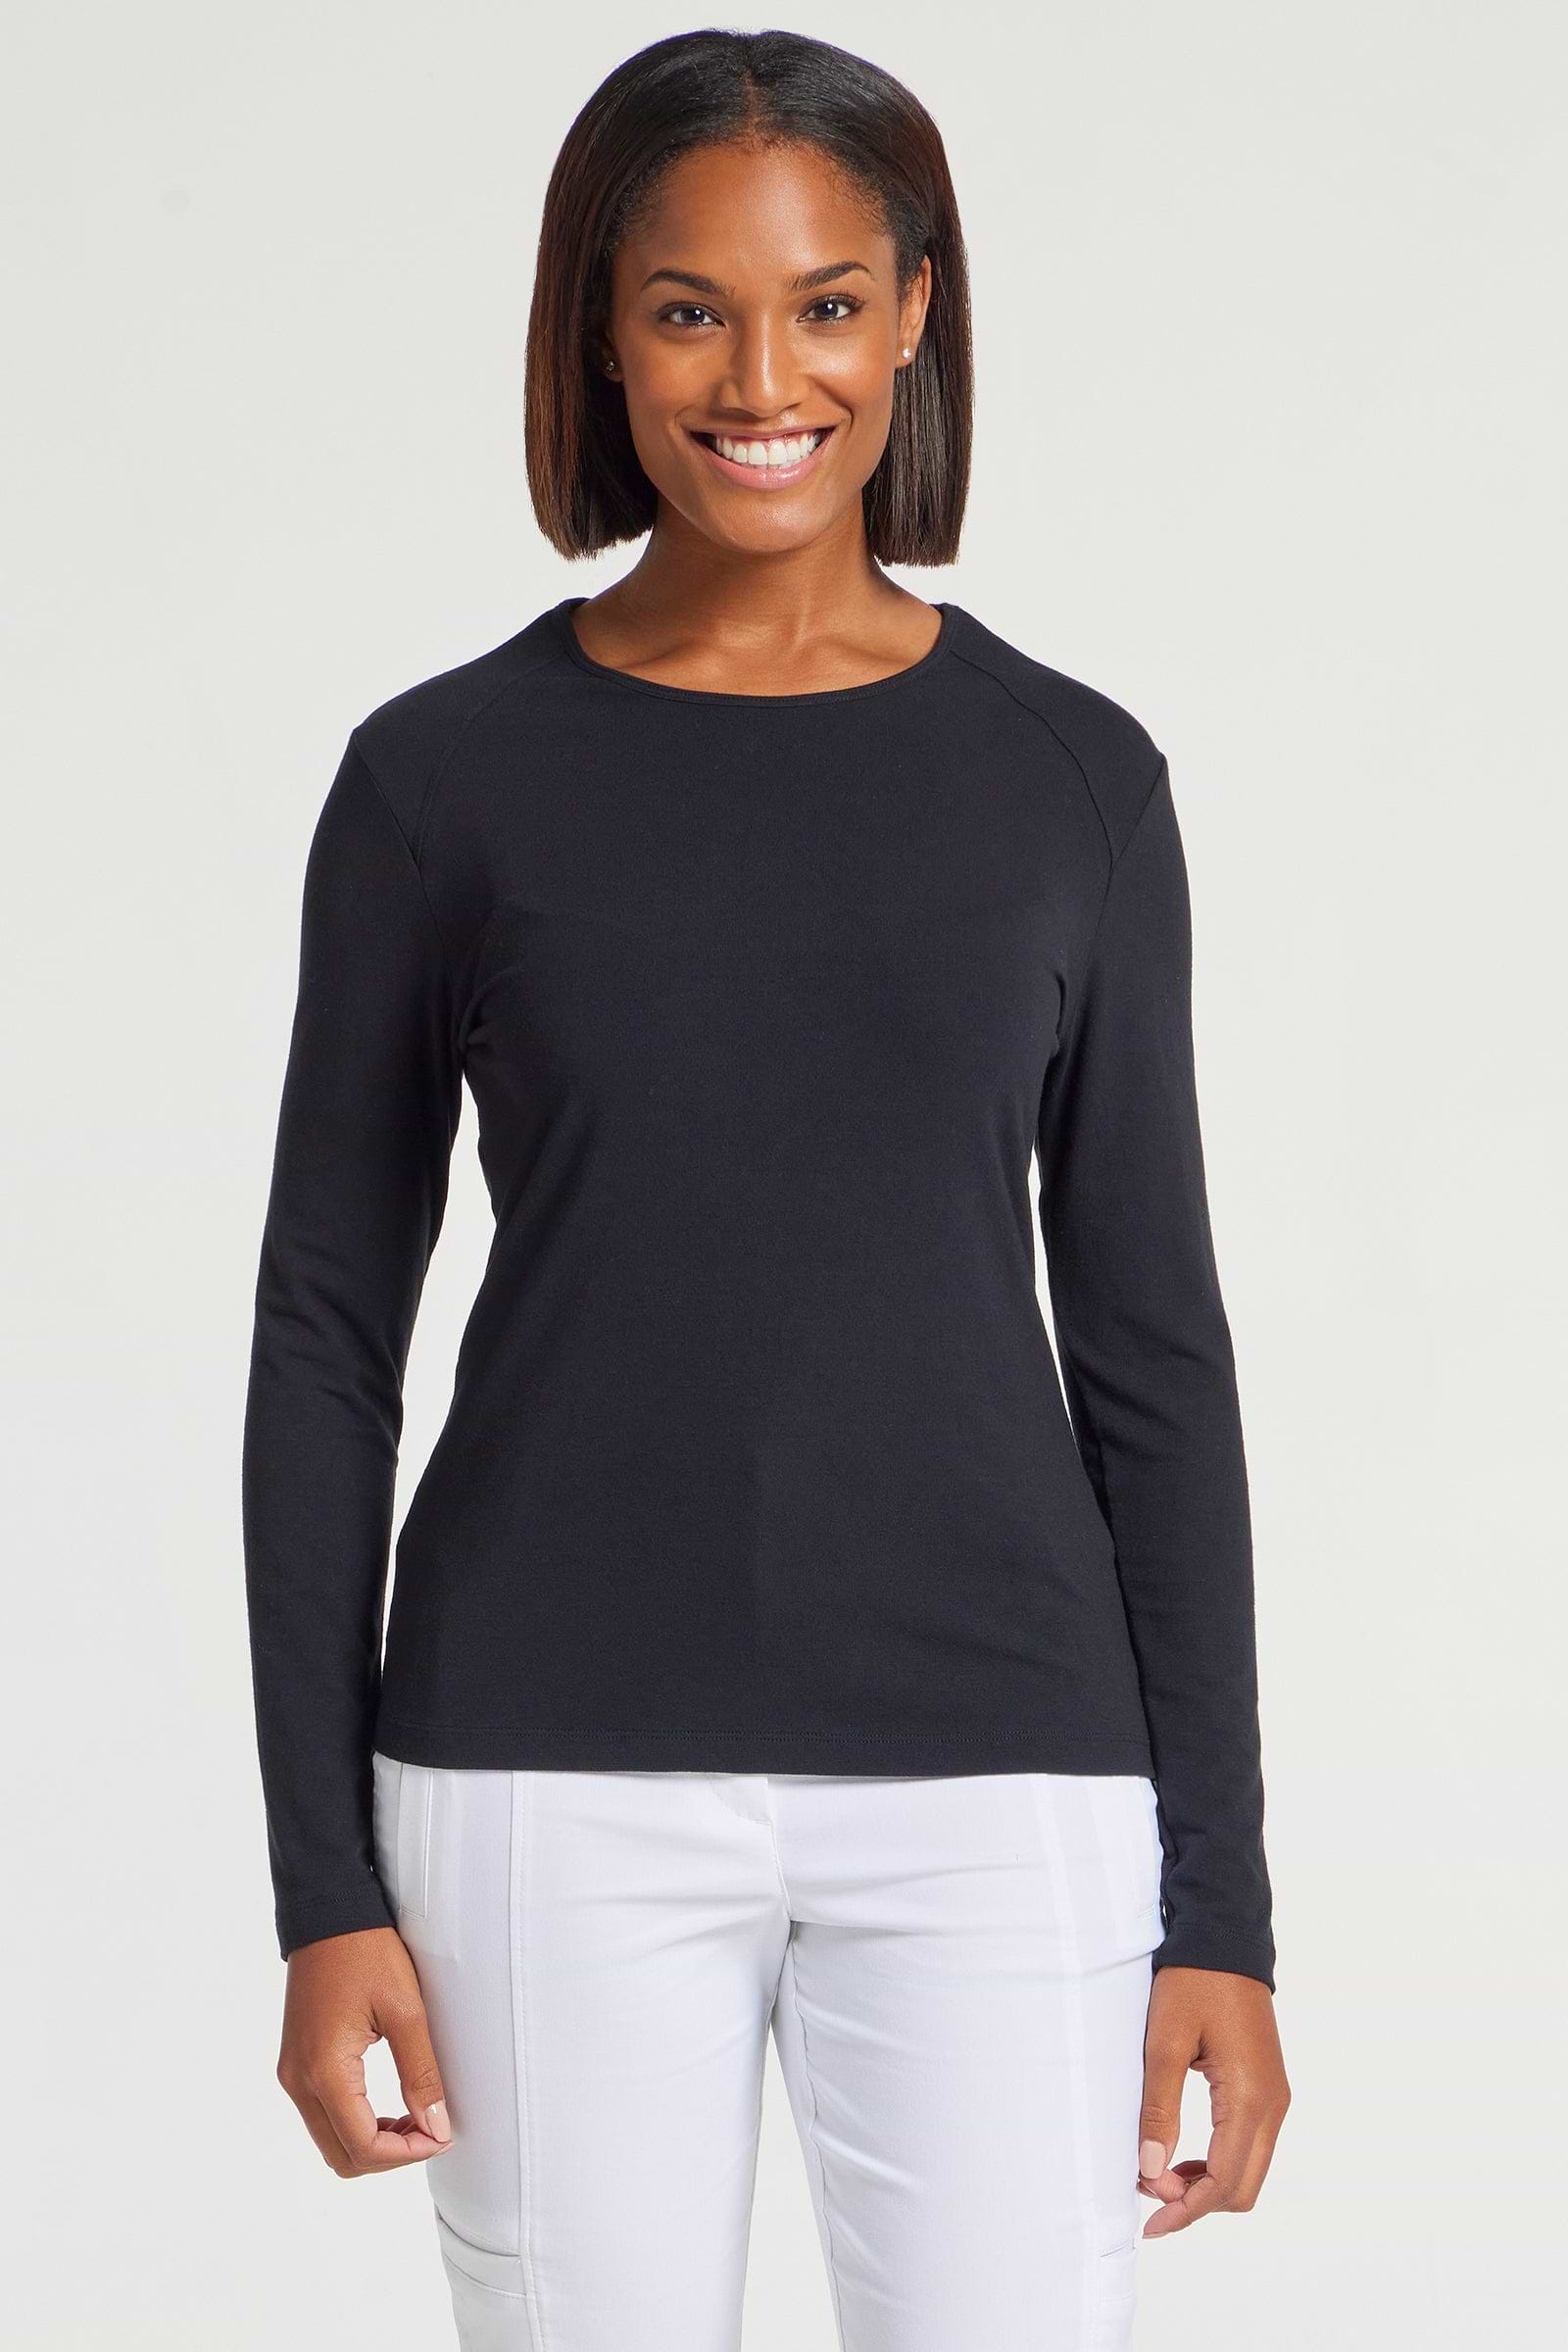 The Best Travel Top. Woman Showing the Front Profile of a Tony Pima Cotton Long-Sleeve Top in Black